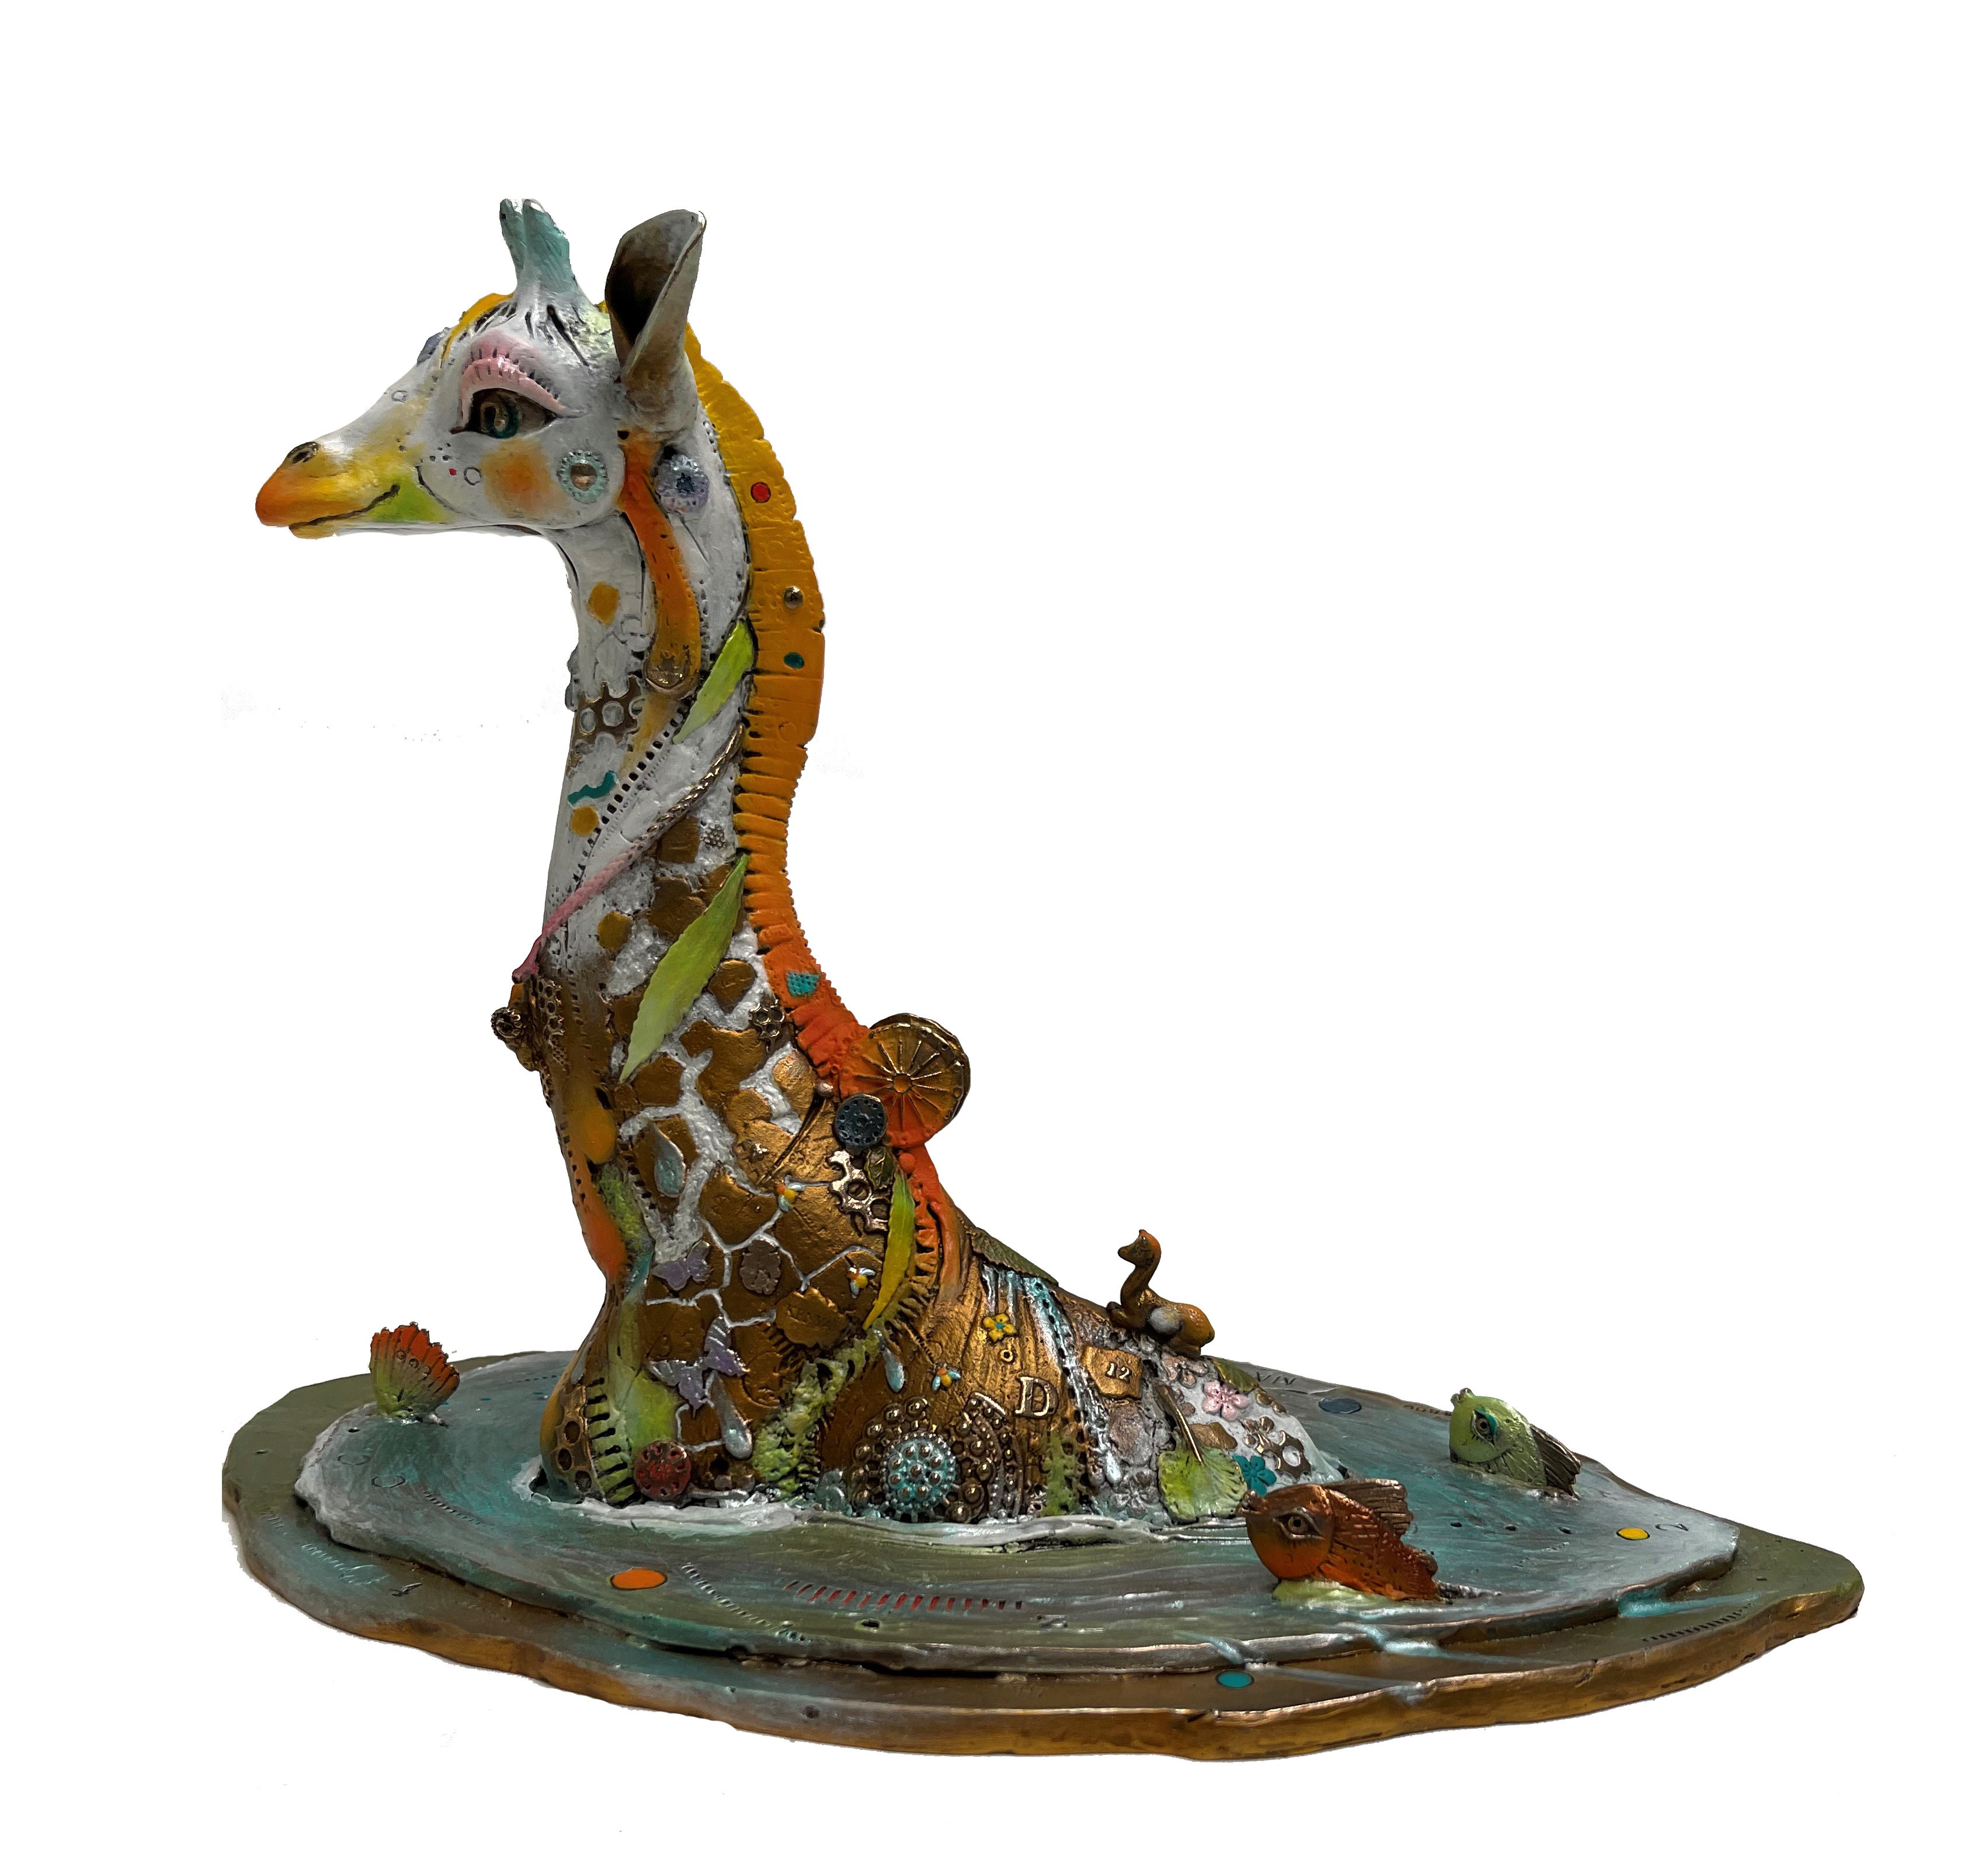 Signed, limited edition bronze giraffe sculpture by Nano Lopez